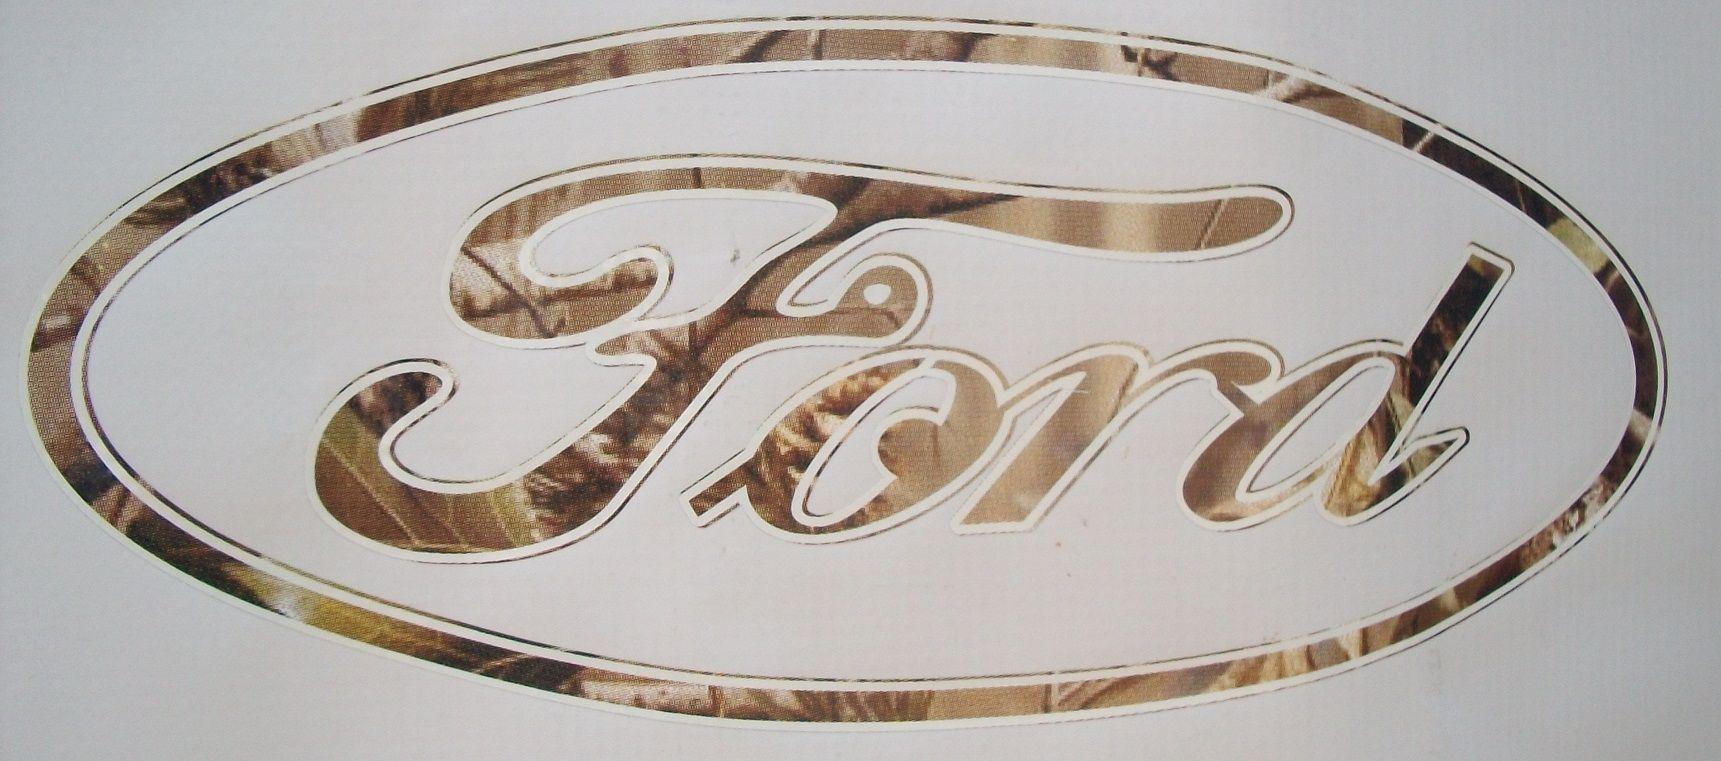 Camo Ford Logo - Ford Oval Camo Decal - Accessories - Scheid Diesel